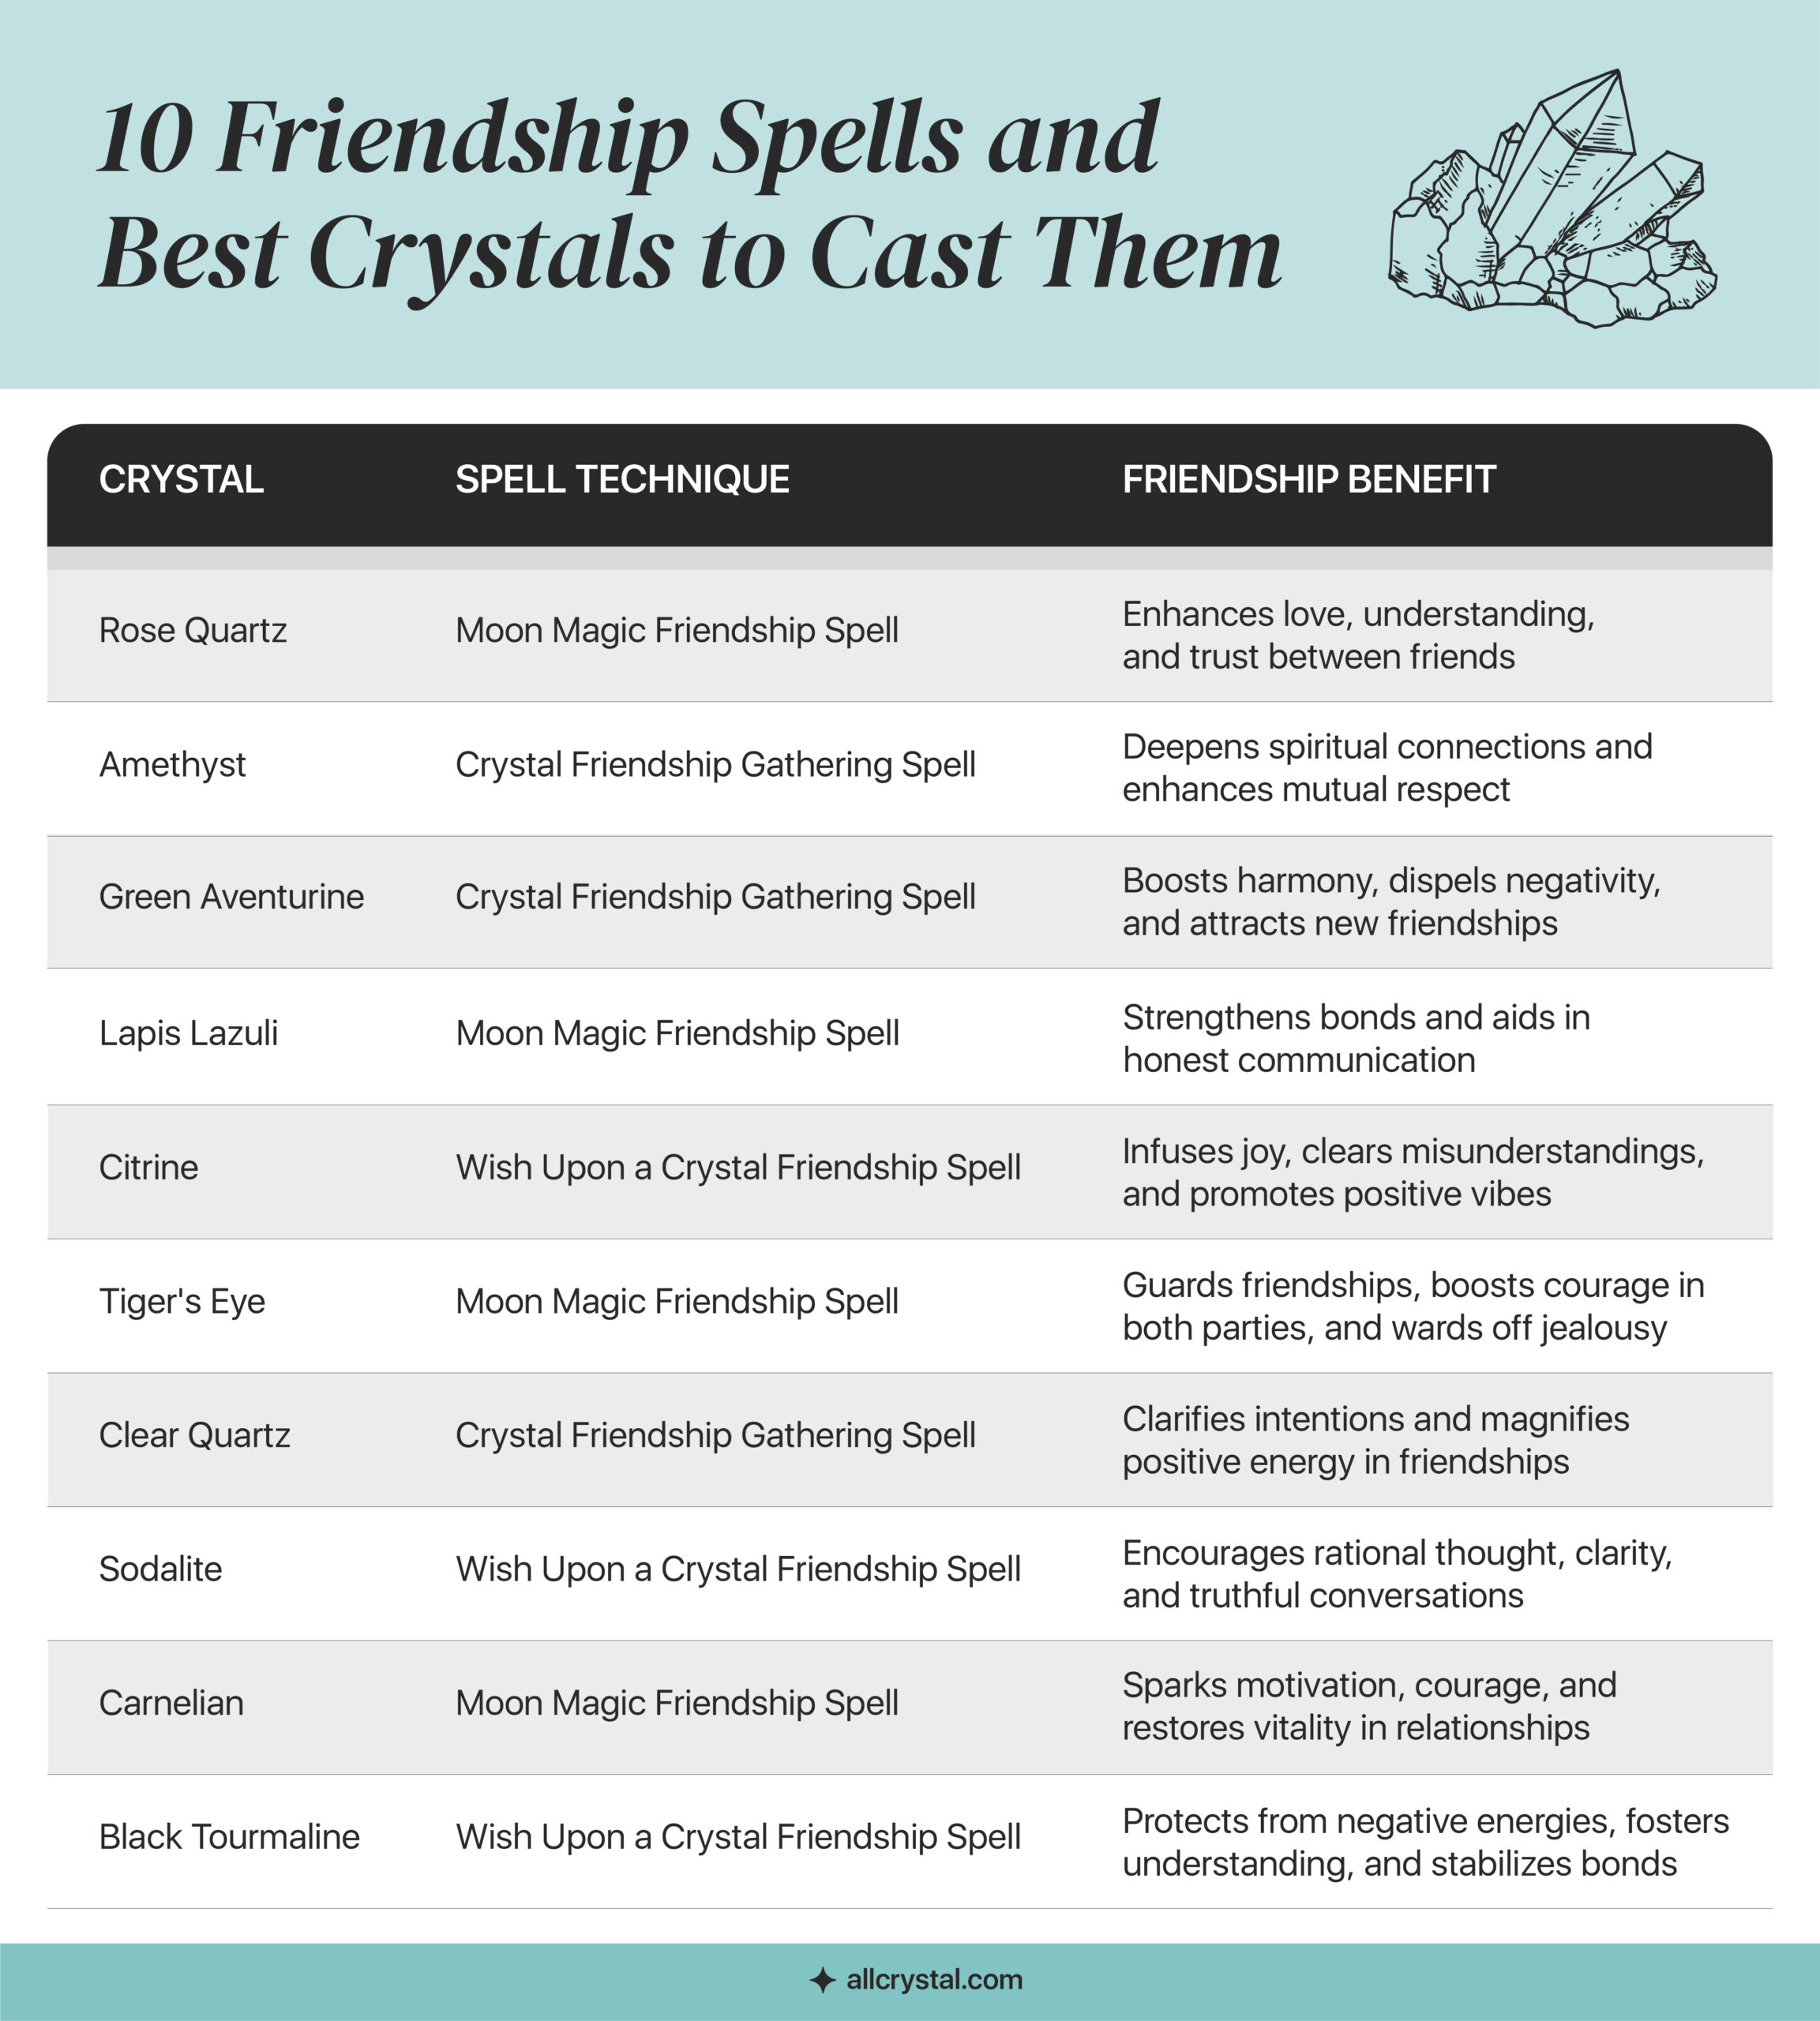 A graphic table containing information about 10 Friendship Spells and Best Crystals to Cast Them